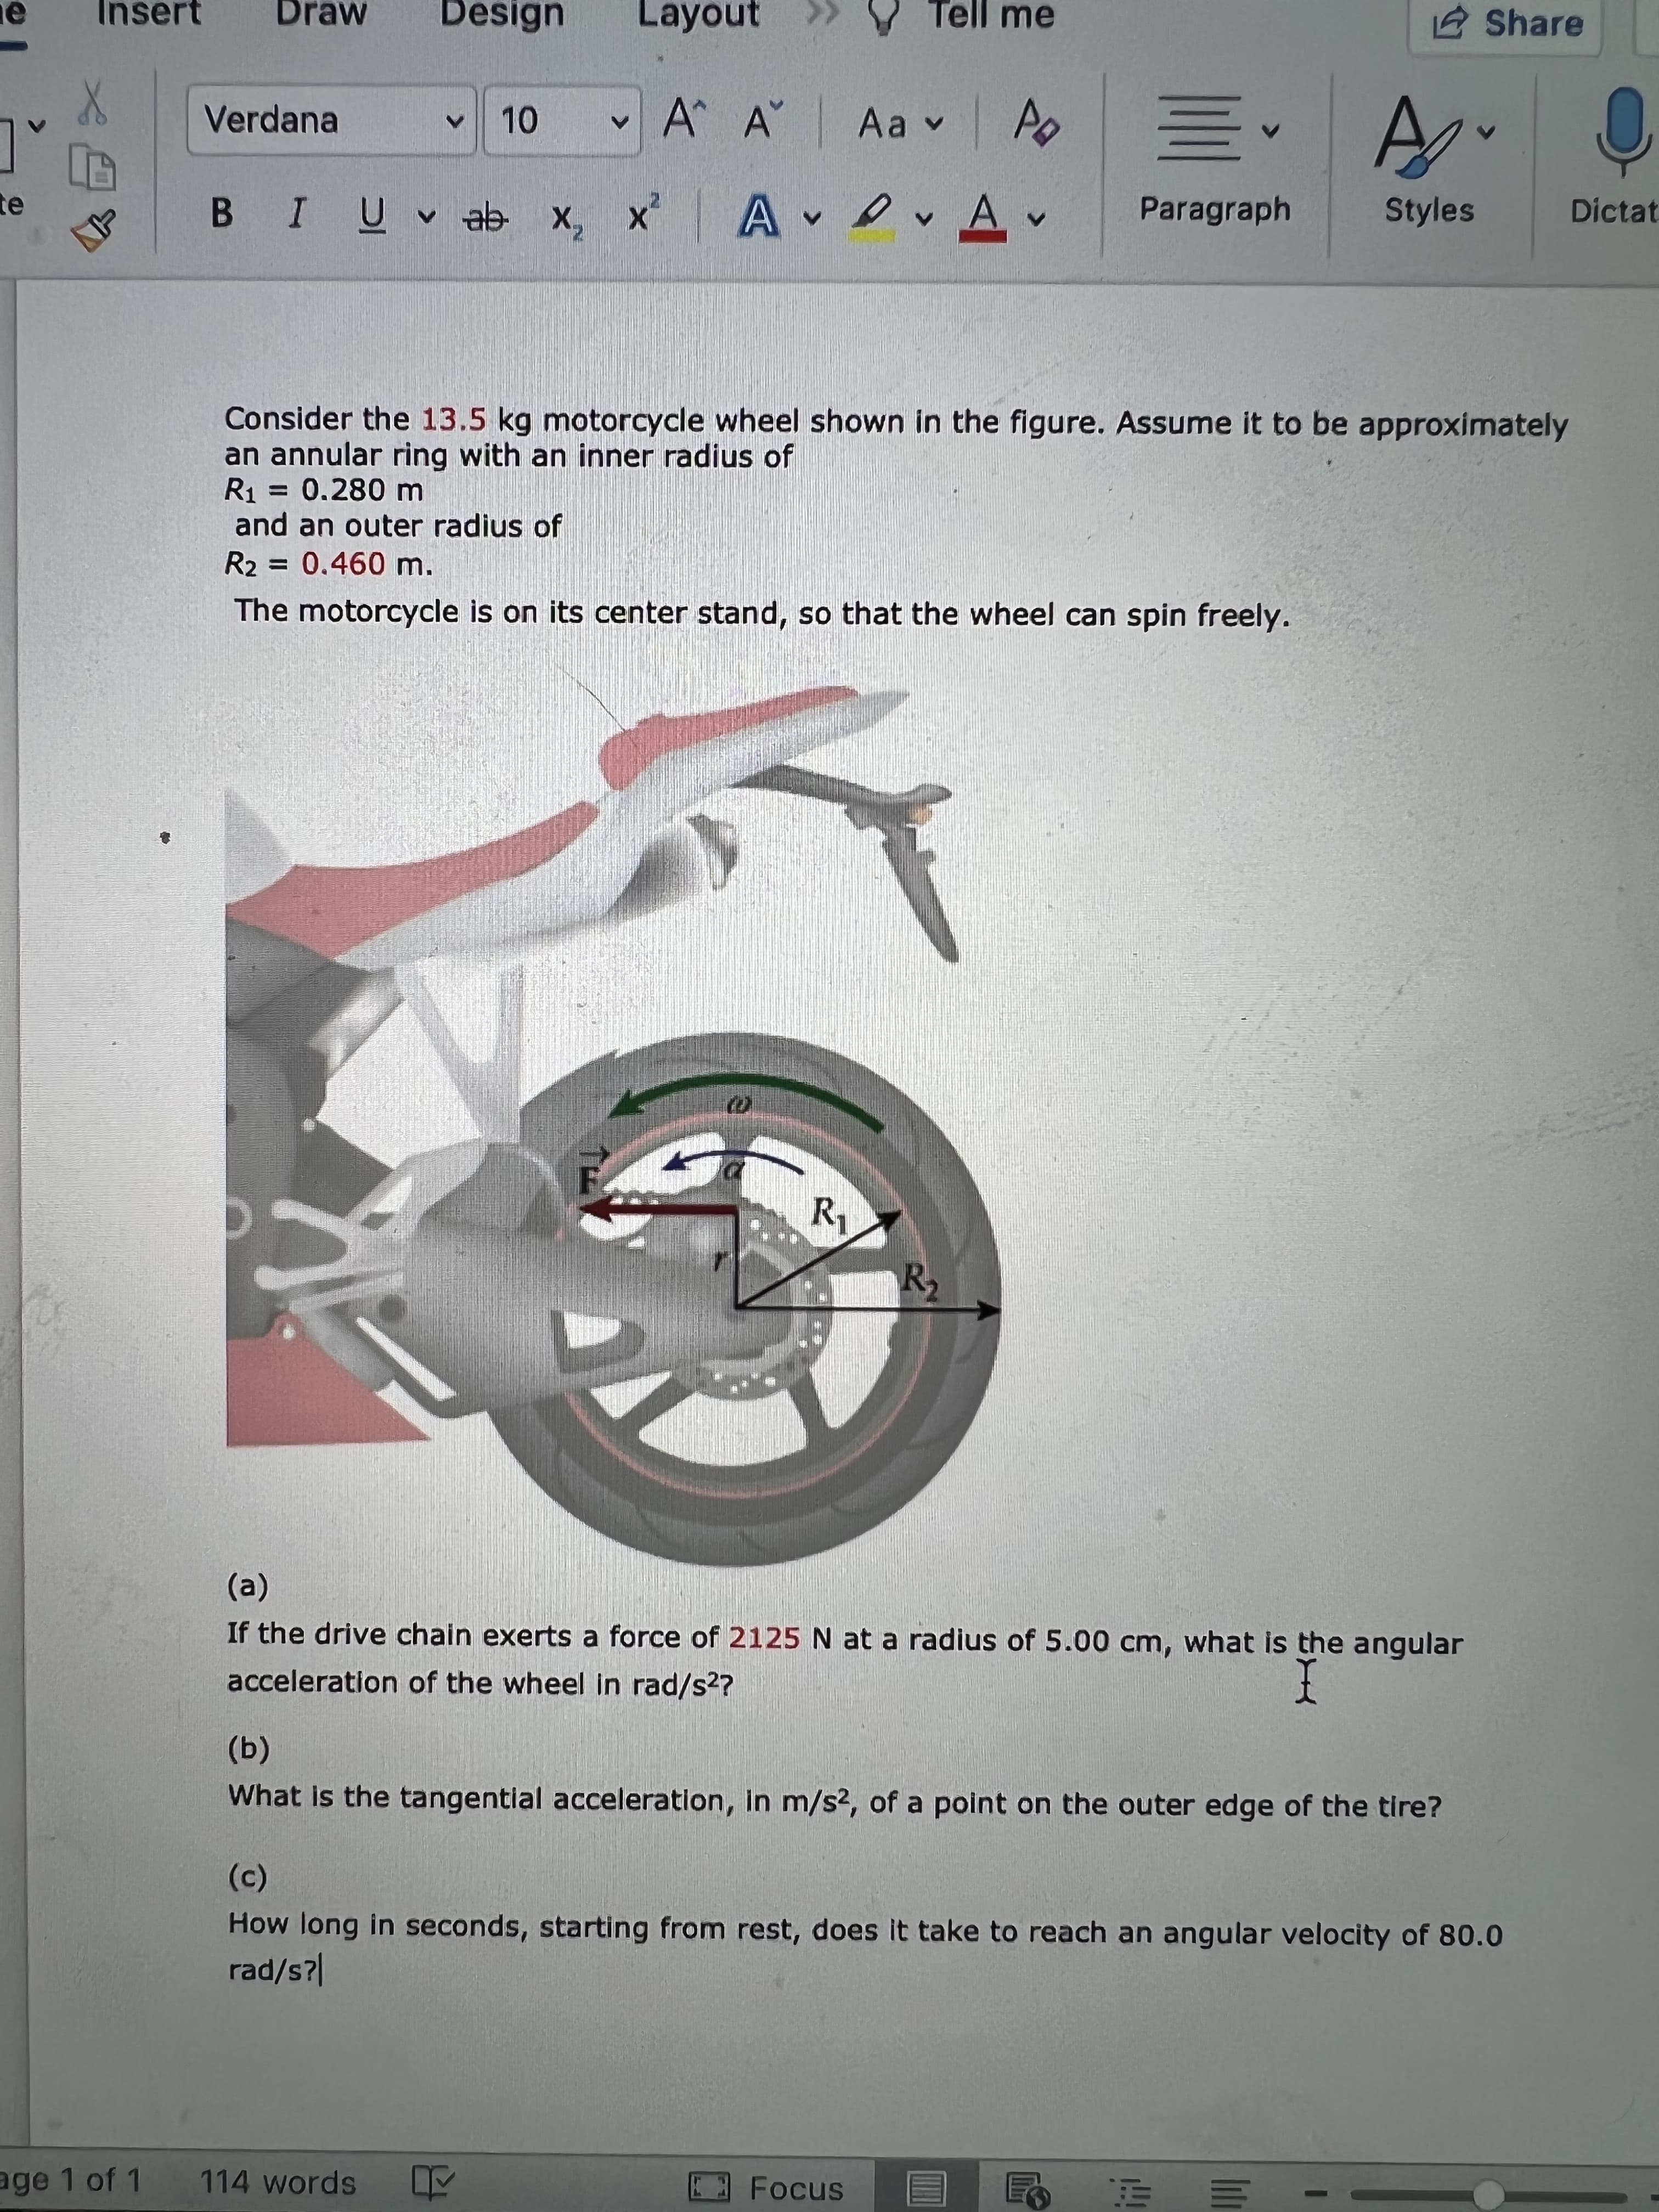 Insert
Draw
Design
Layout
V Tell me
2 Share
Verdana
v10
vA A
A evA.
Paragraph
Styles
te
Dictat
Ge n ñ I
Consider the 13.5 kg motorcycle wheel shown in the figure. Assume it to be approximately
an annular ring with an inner radius of
= 0.280 m
R1
and an outer radius of
R2 = 0.460 m.
The motorcycle is on its center stand, so that the wheel can spin freely.
(a)
If the drive chain exerts a force of 2125 N at a radius of 5.00 cm, what is the angular
acceleration of the wheel in rad/s2?
(b)
What is the tangential acceleration, In m/s2, of a point on the outer edge of the tire?
How long in seconds, starting from rest, does it take to reach an angular velocity of 80.0
rad/s?
age 1 of 1
114 words
Focus
